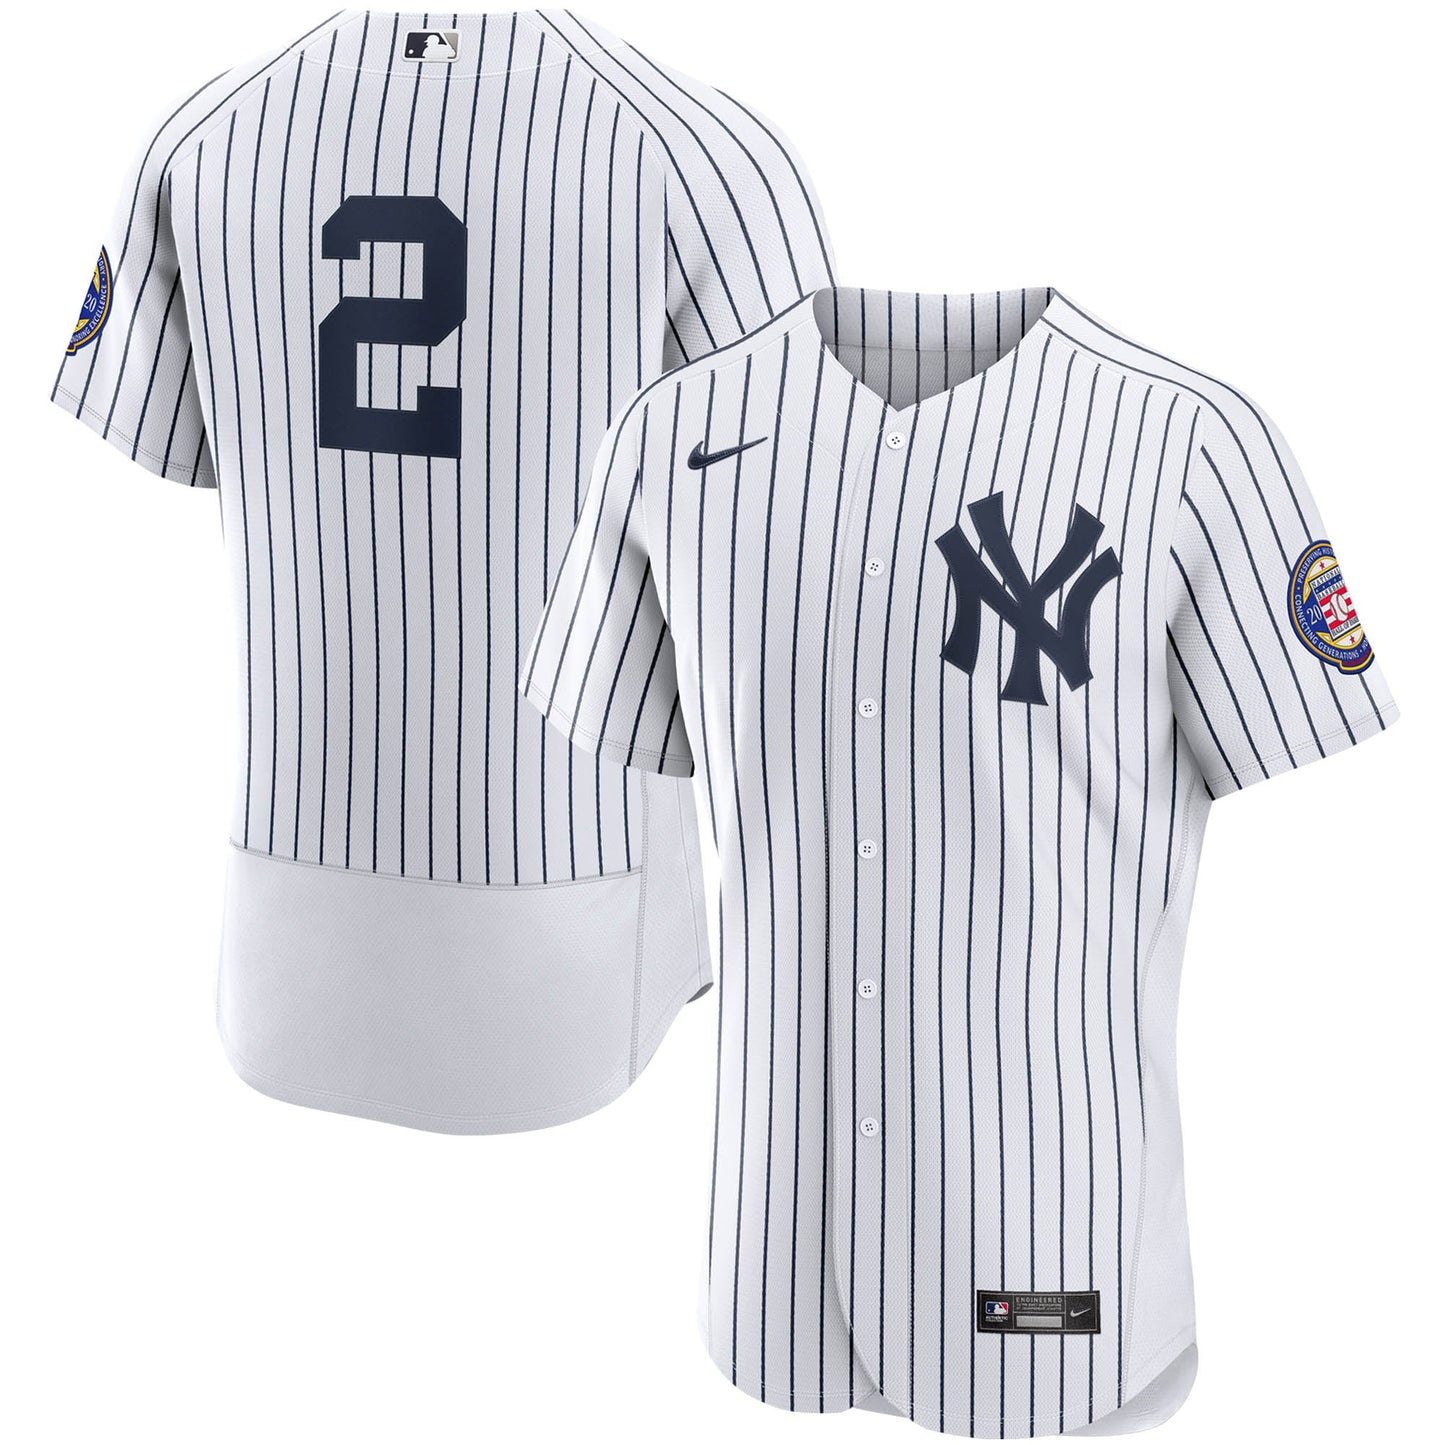 Derek Jeter New York Yankees Nike 2020 Hall of Fame Induction Patch Authentic Jersey - White/Navy